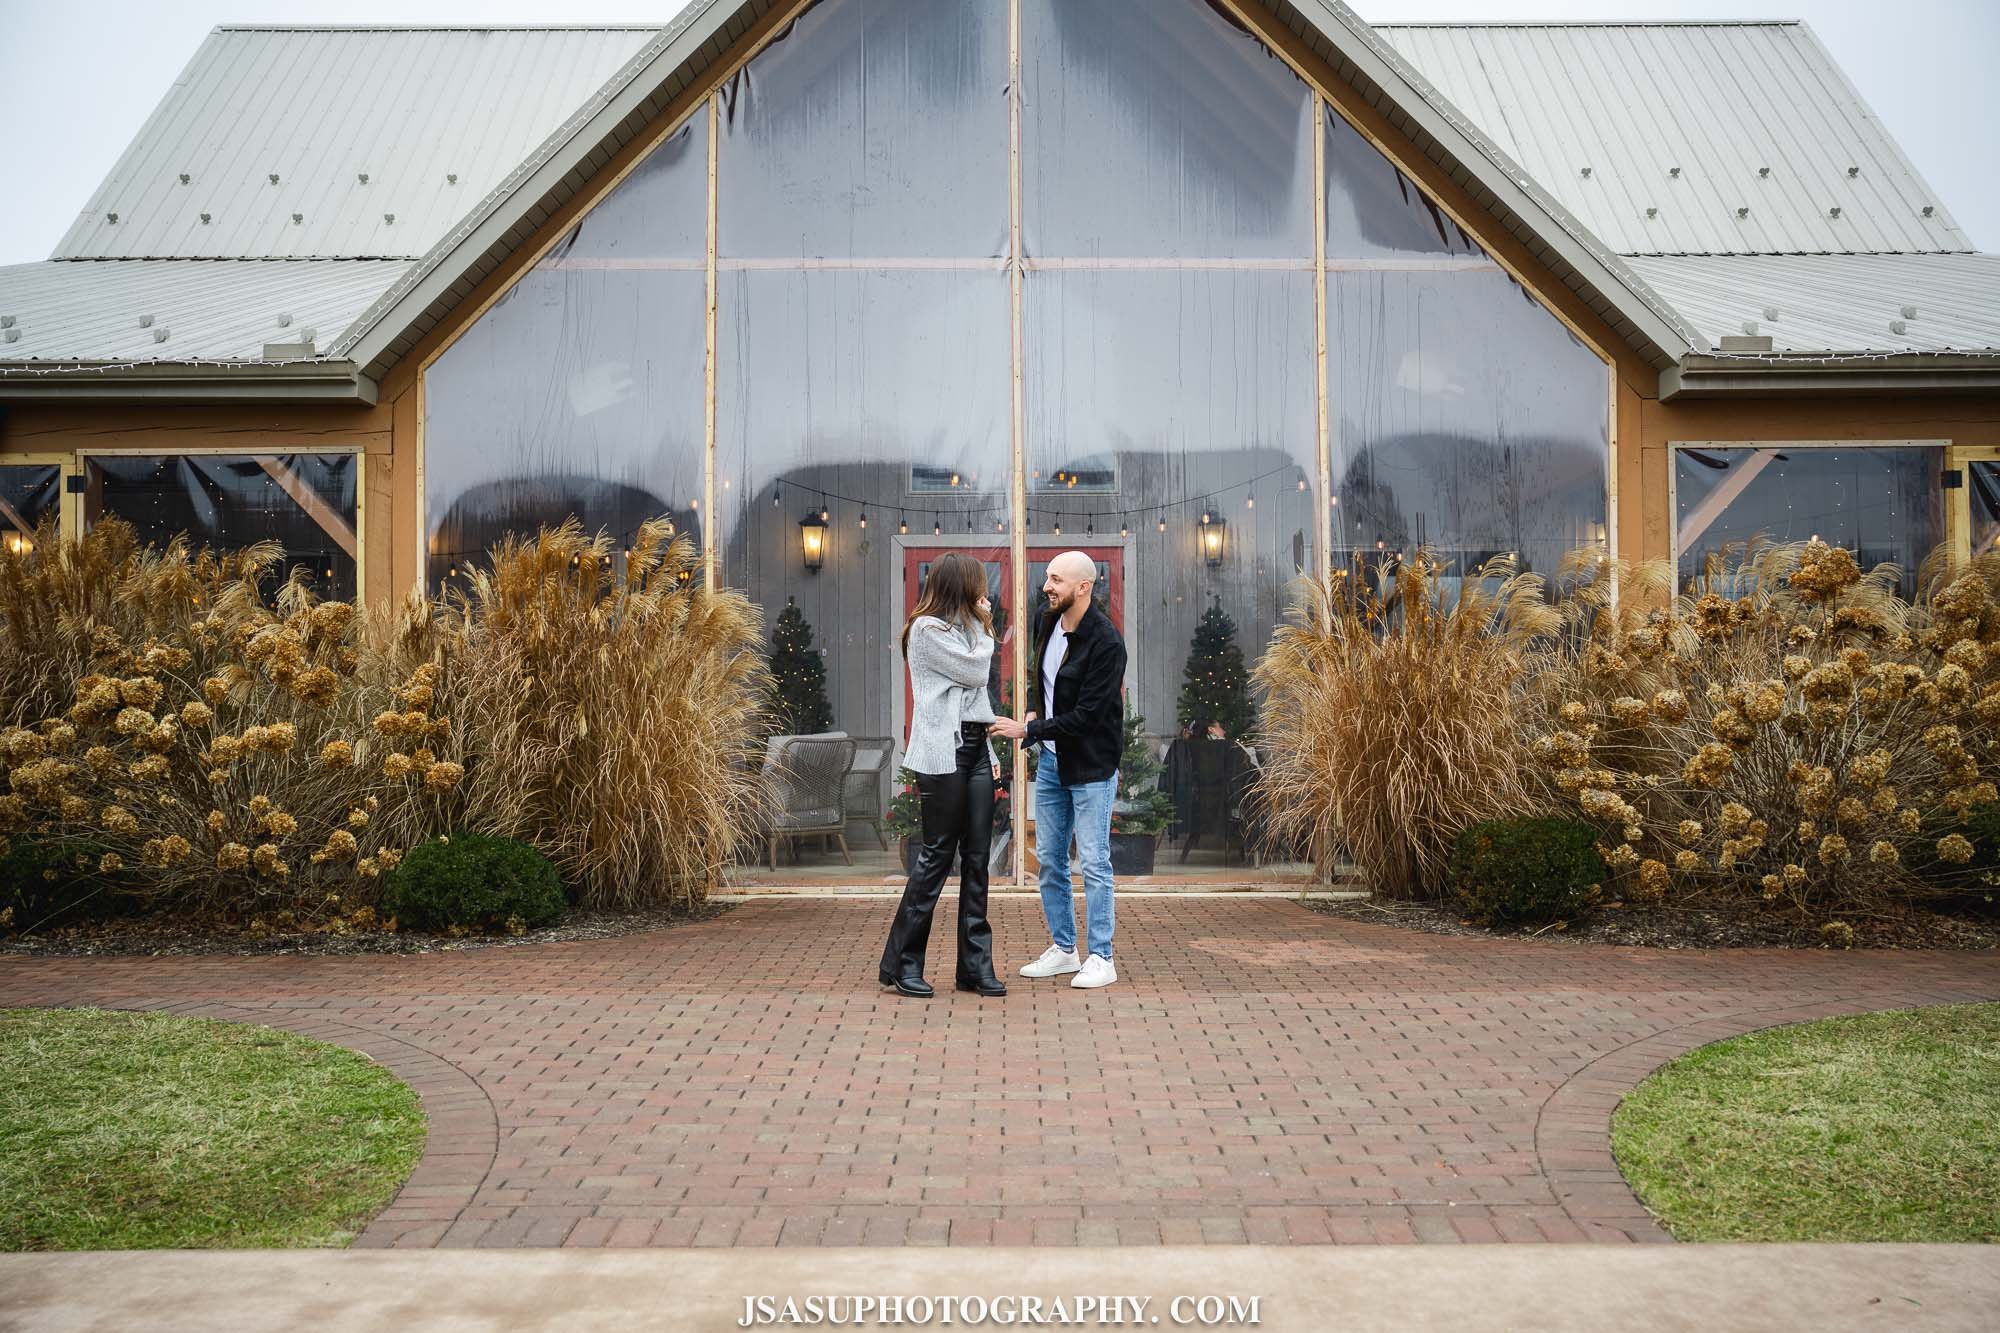 drew-alex-surprise-proposal-photos-old-westminister-winery-jsasuphotography-2.jpg